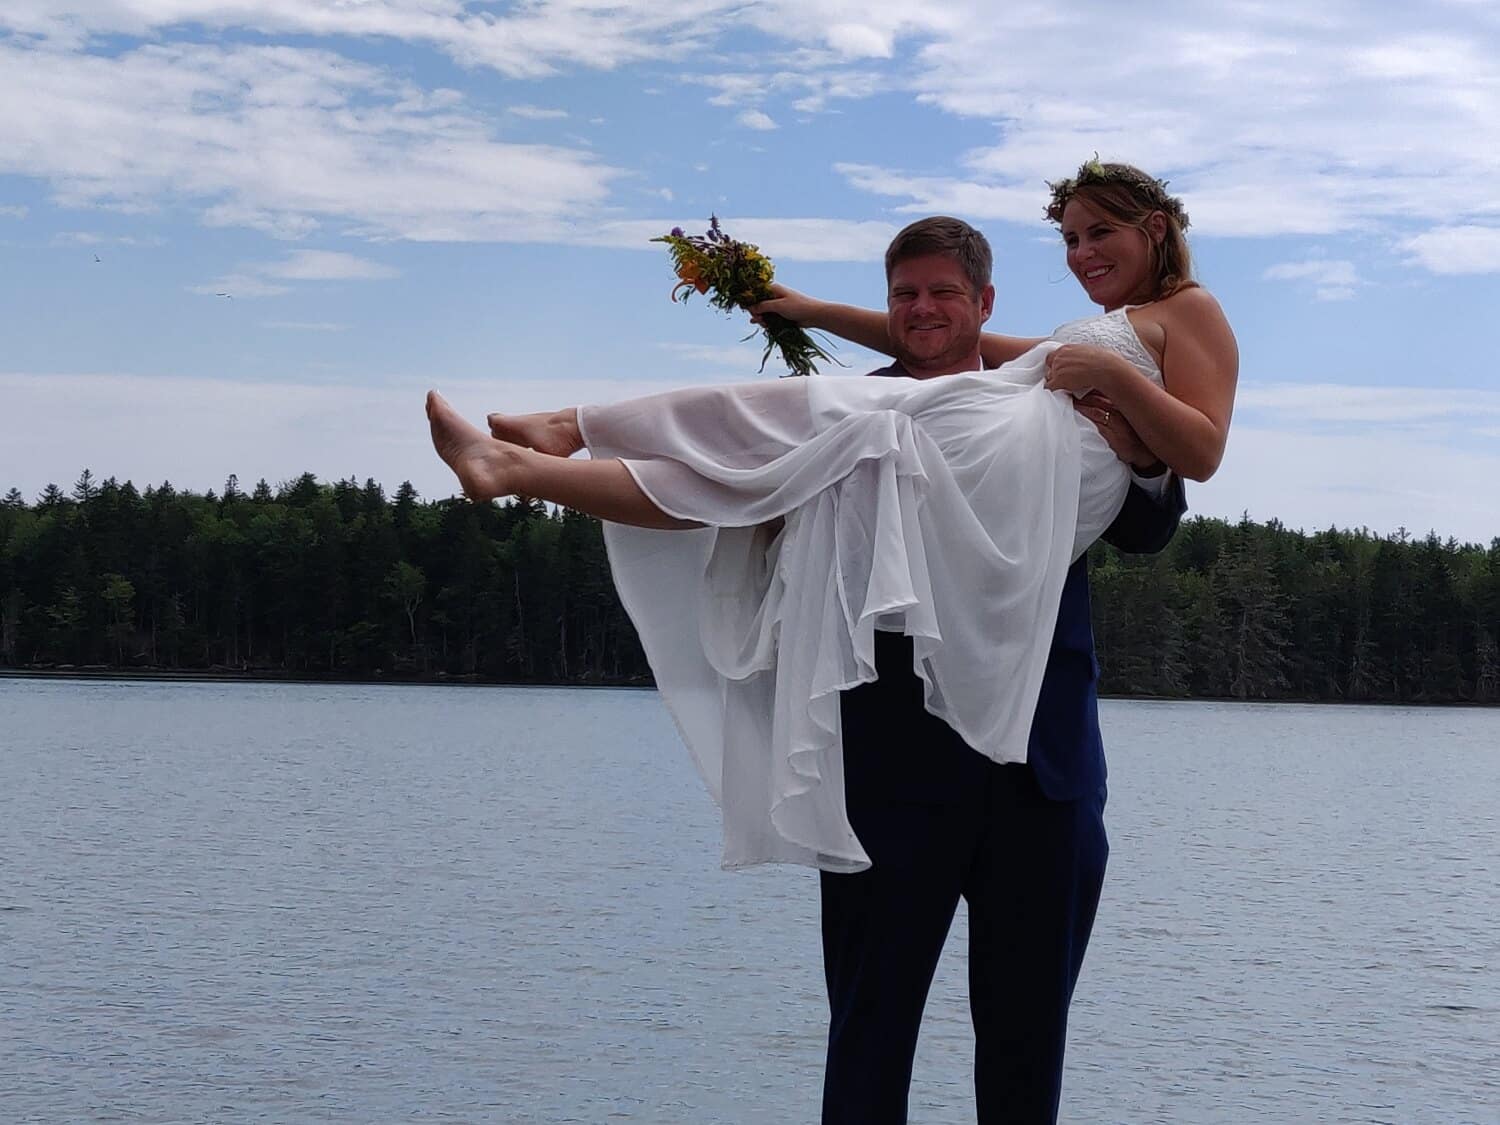 A groom carrying a bride with a bouquet with water, trees  and a blue sky in background